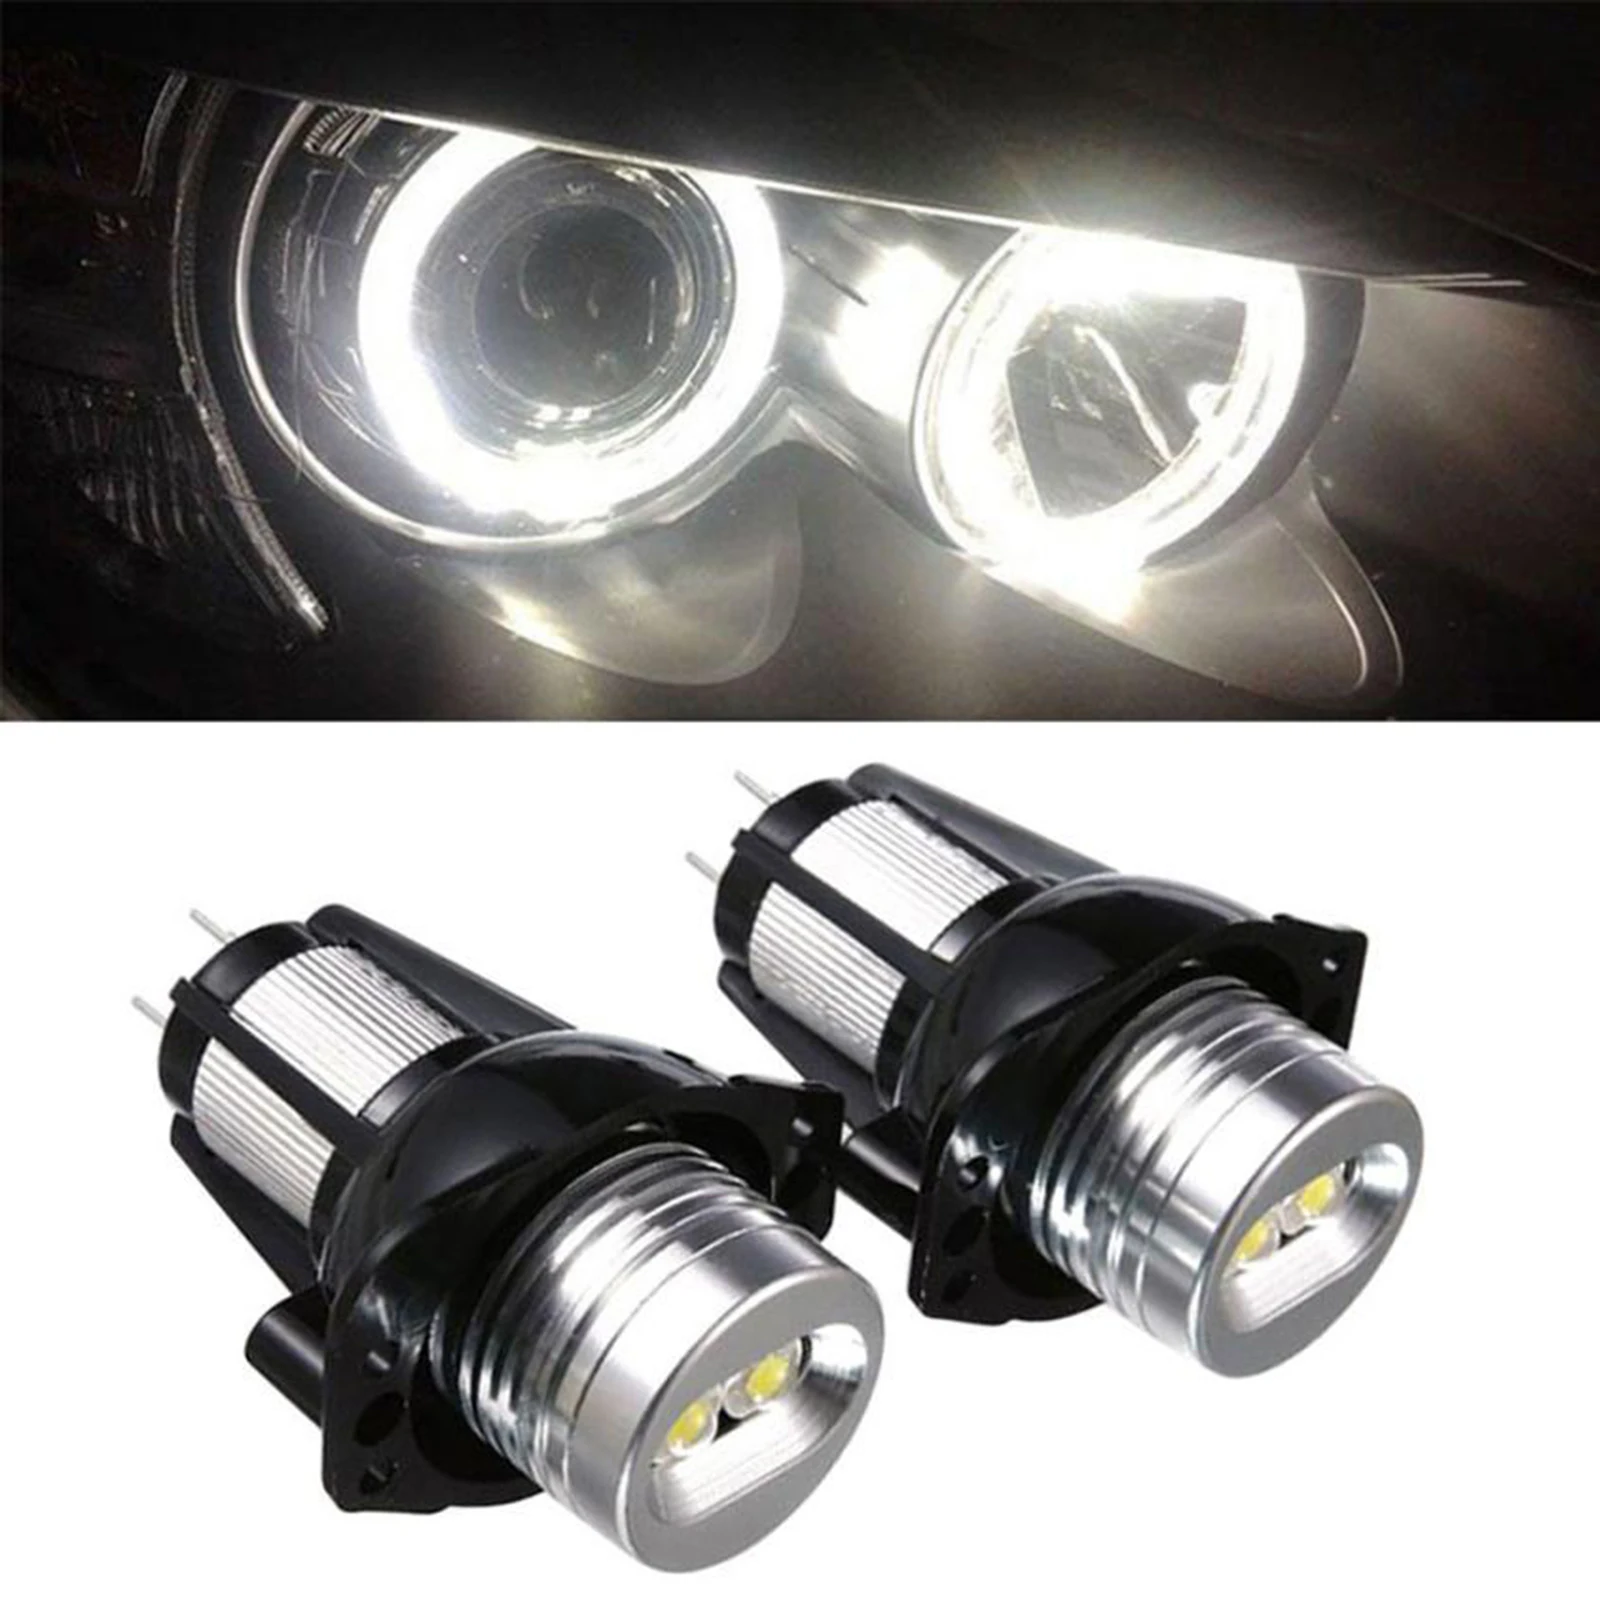 

2x Angel Eyes Light Bulb 6000K Fits for BMW E90 E91 05-08 Replace Parts Acc